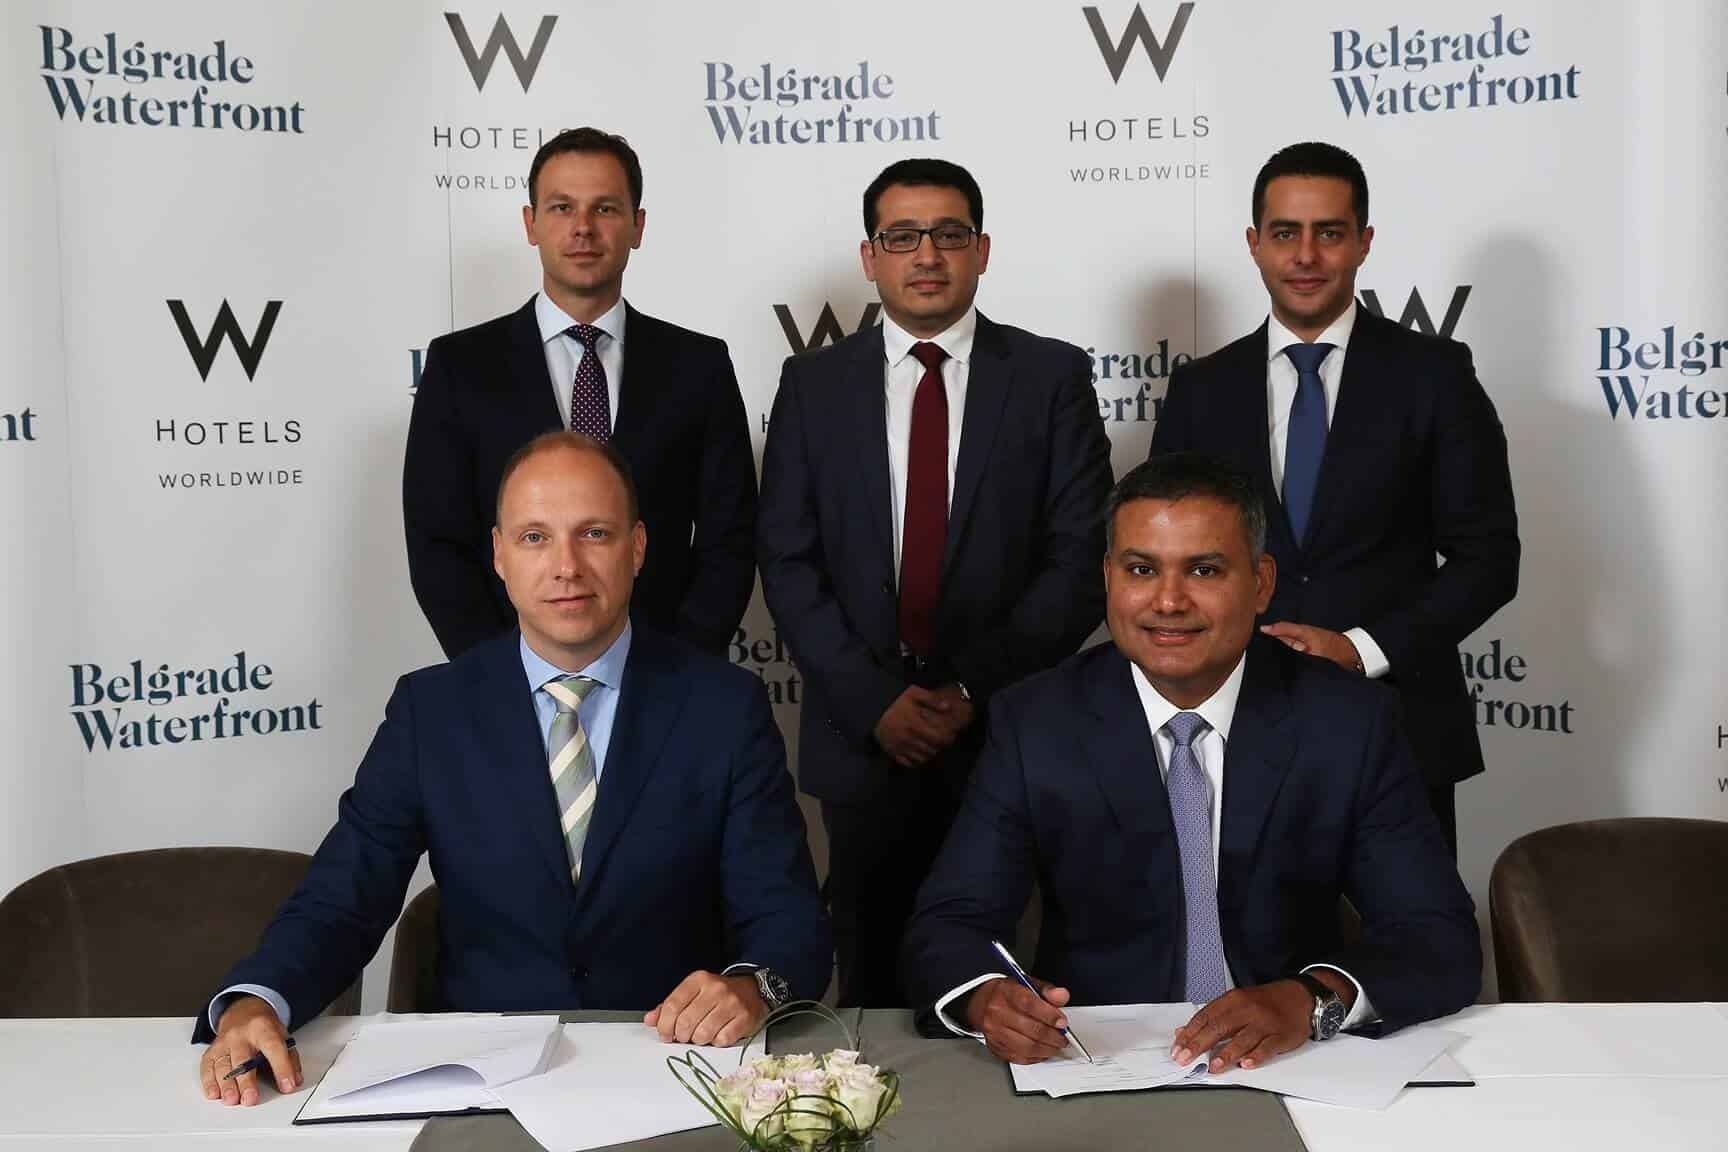 W Hotels Worldwide to Debut in Serbia with W Belgrade and the Residences at W Belgrade, in Belgrade Waterfront, in 2019